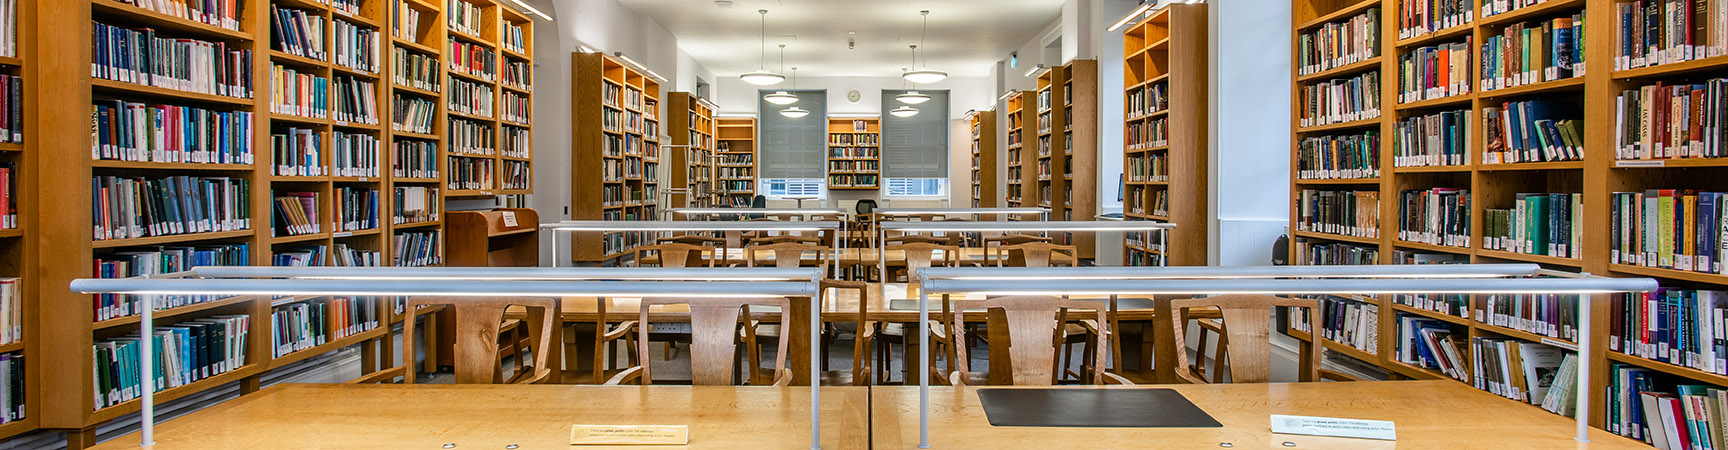 A long wooden desk across a room with bookshelves on either side